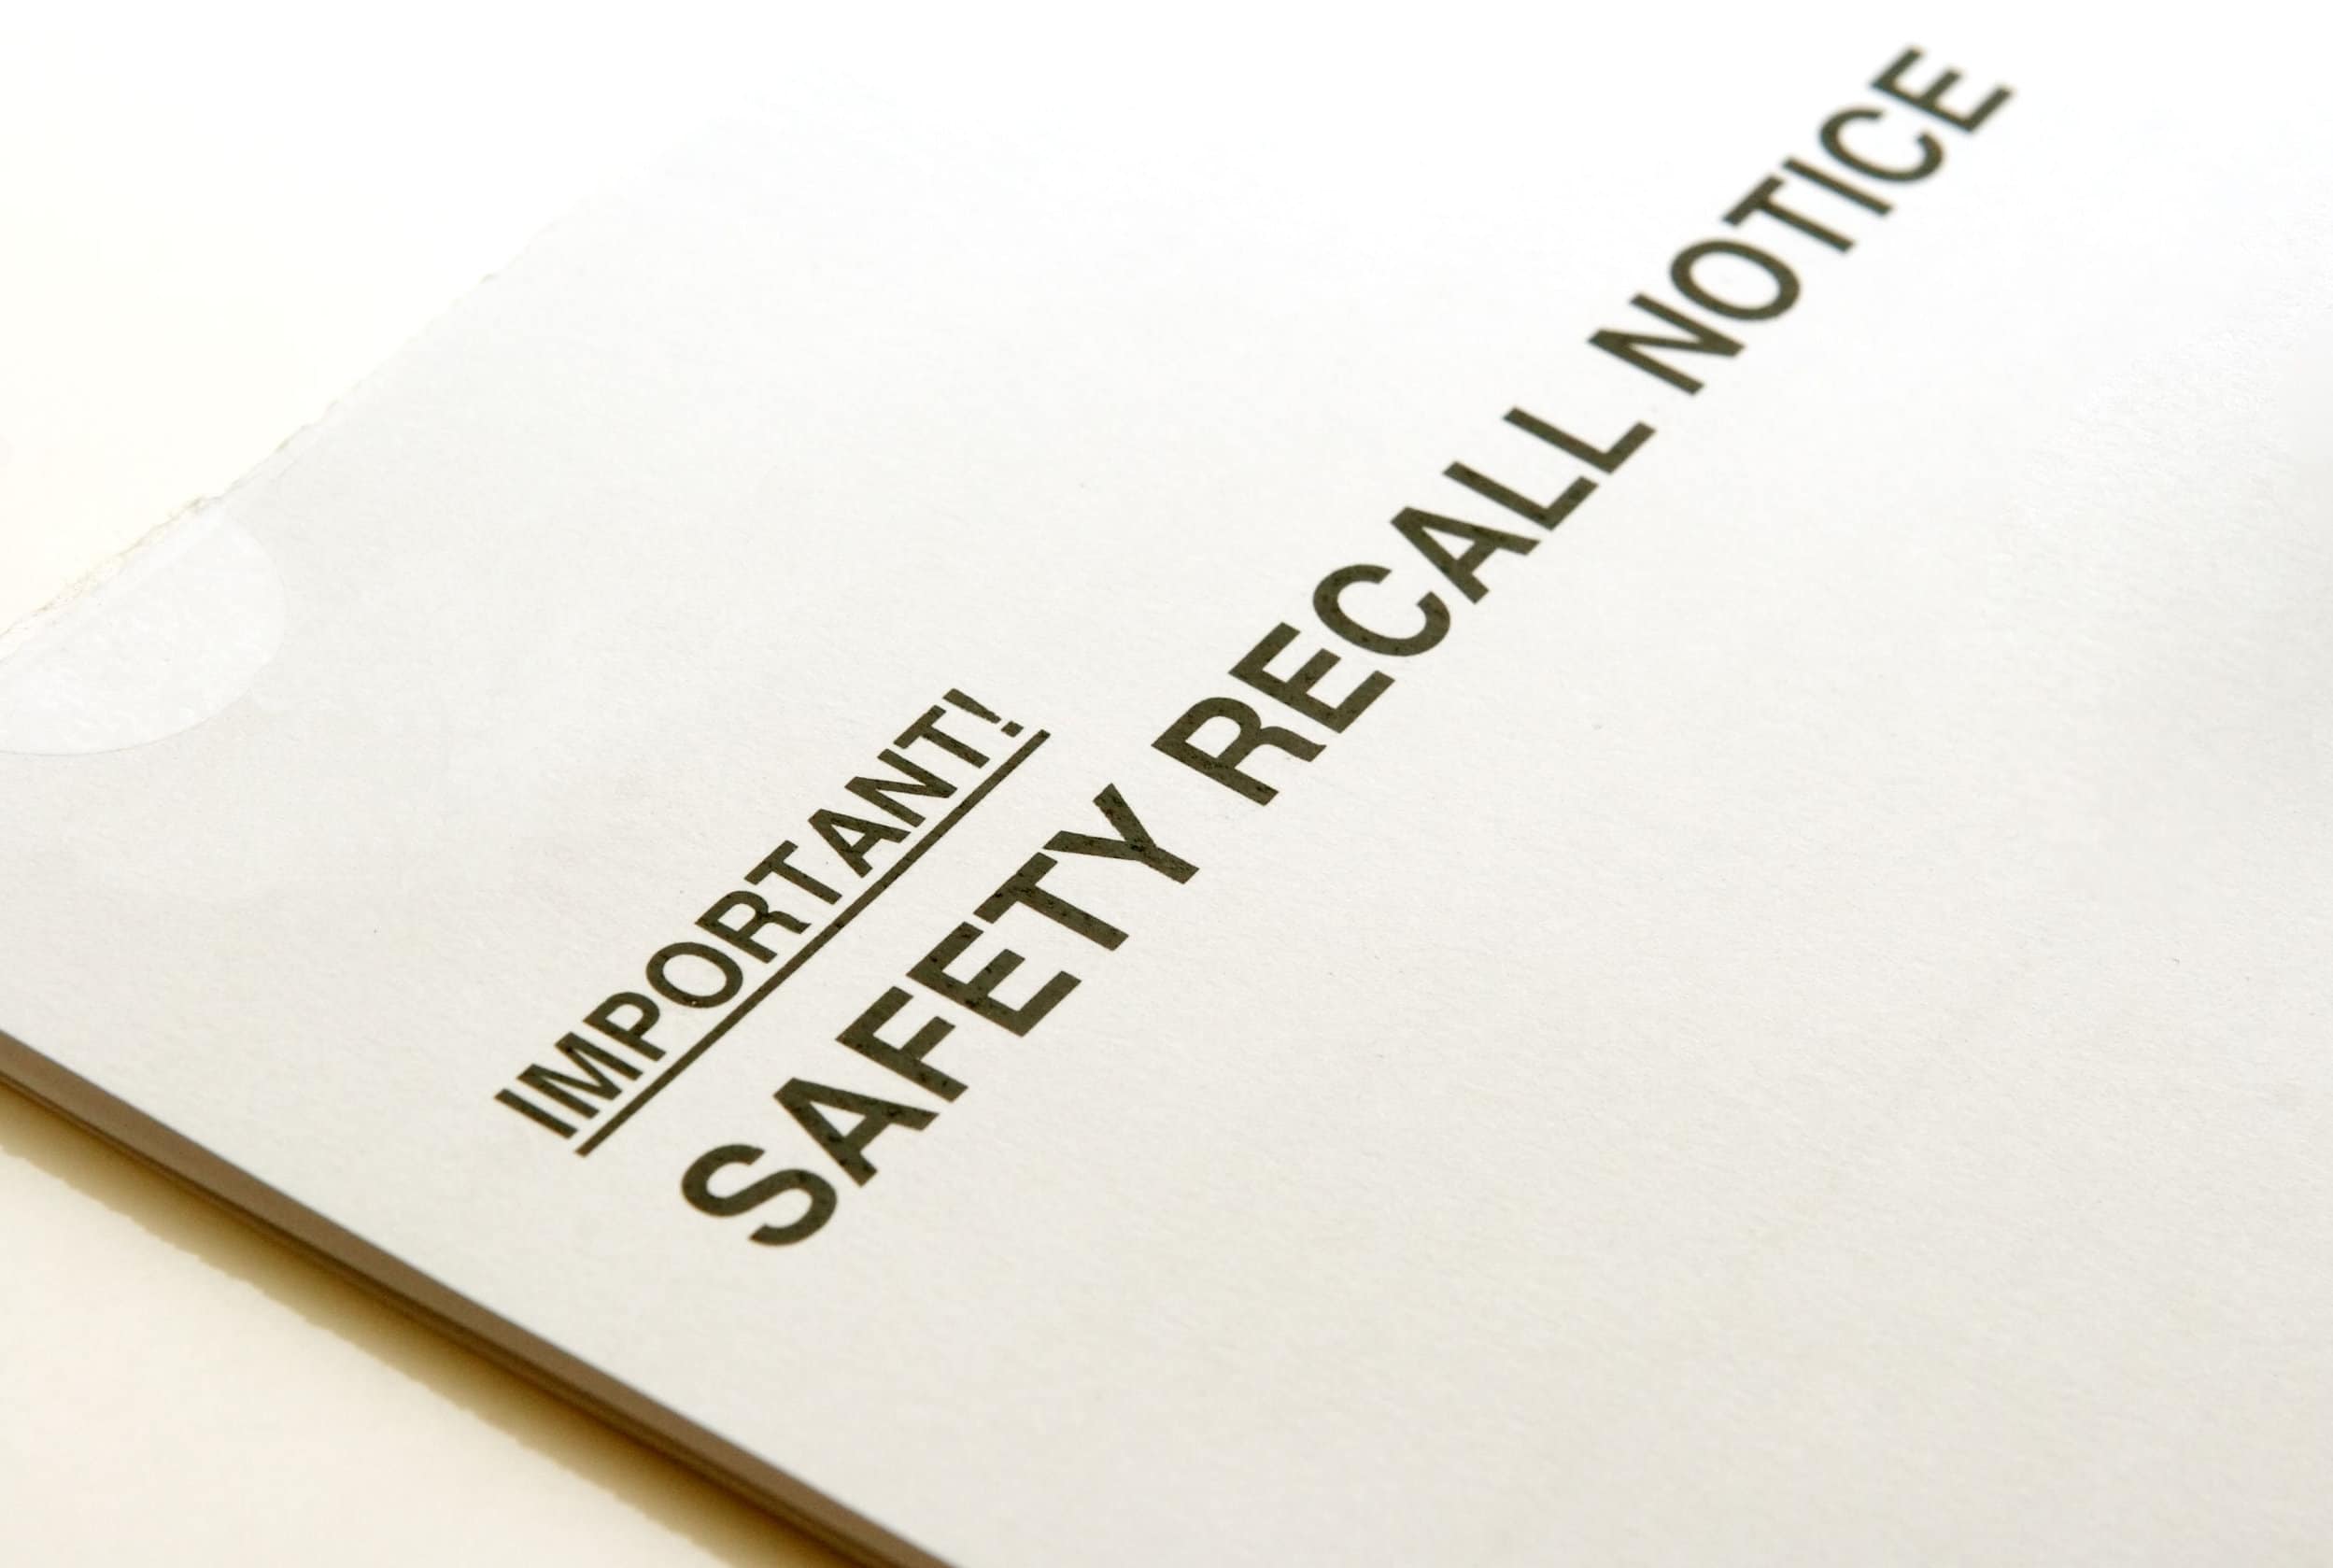 Product Liability: What Happens If You’re Hurt by a Recalled Product?